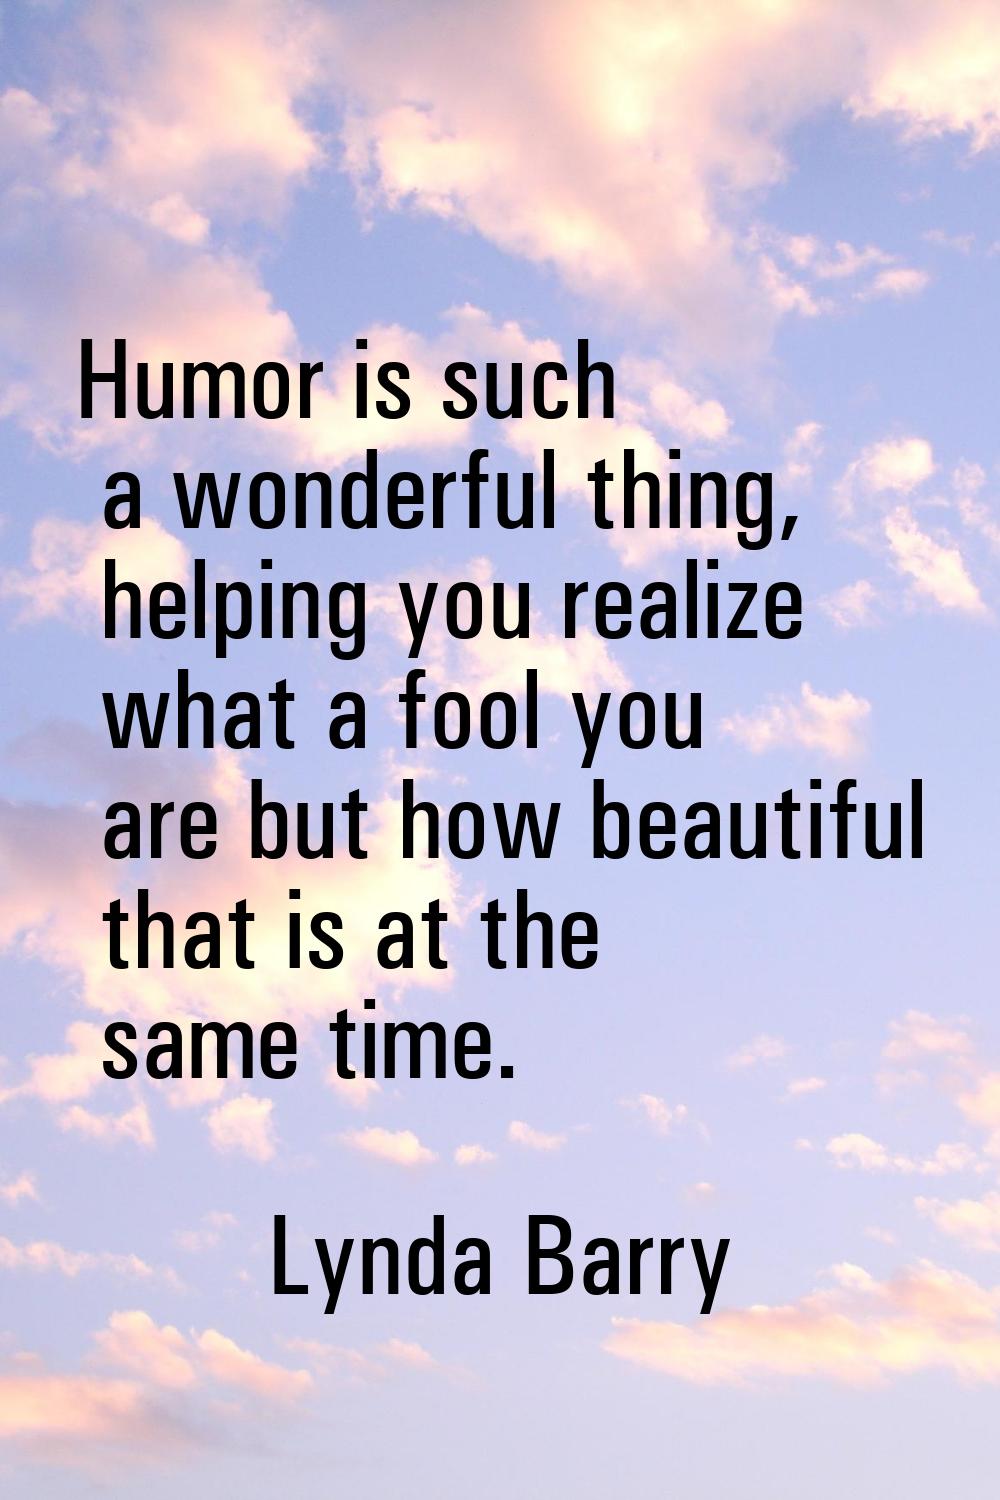 Humor is such a wonderful thing, helping you realize what a fool you are but how beautiful that is 